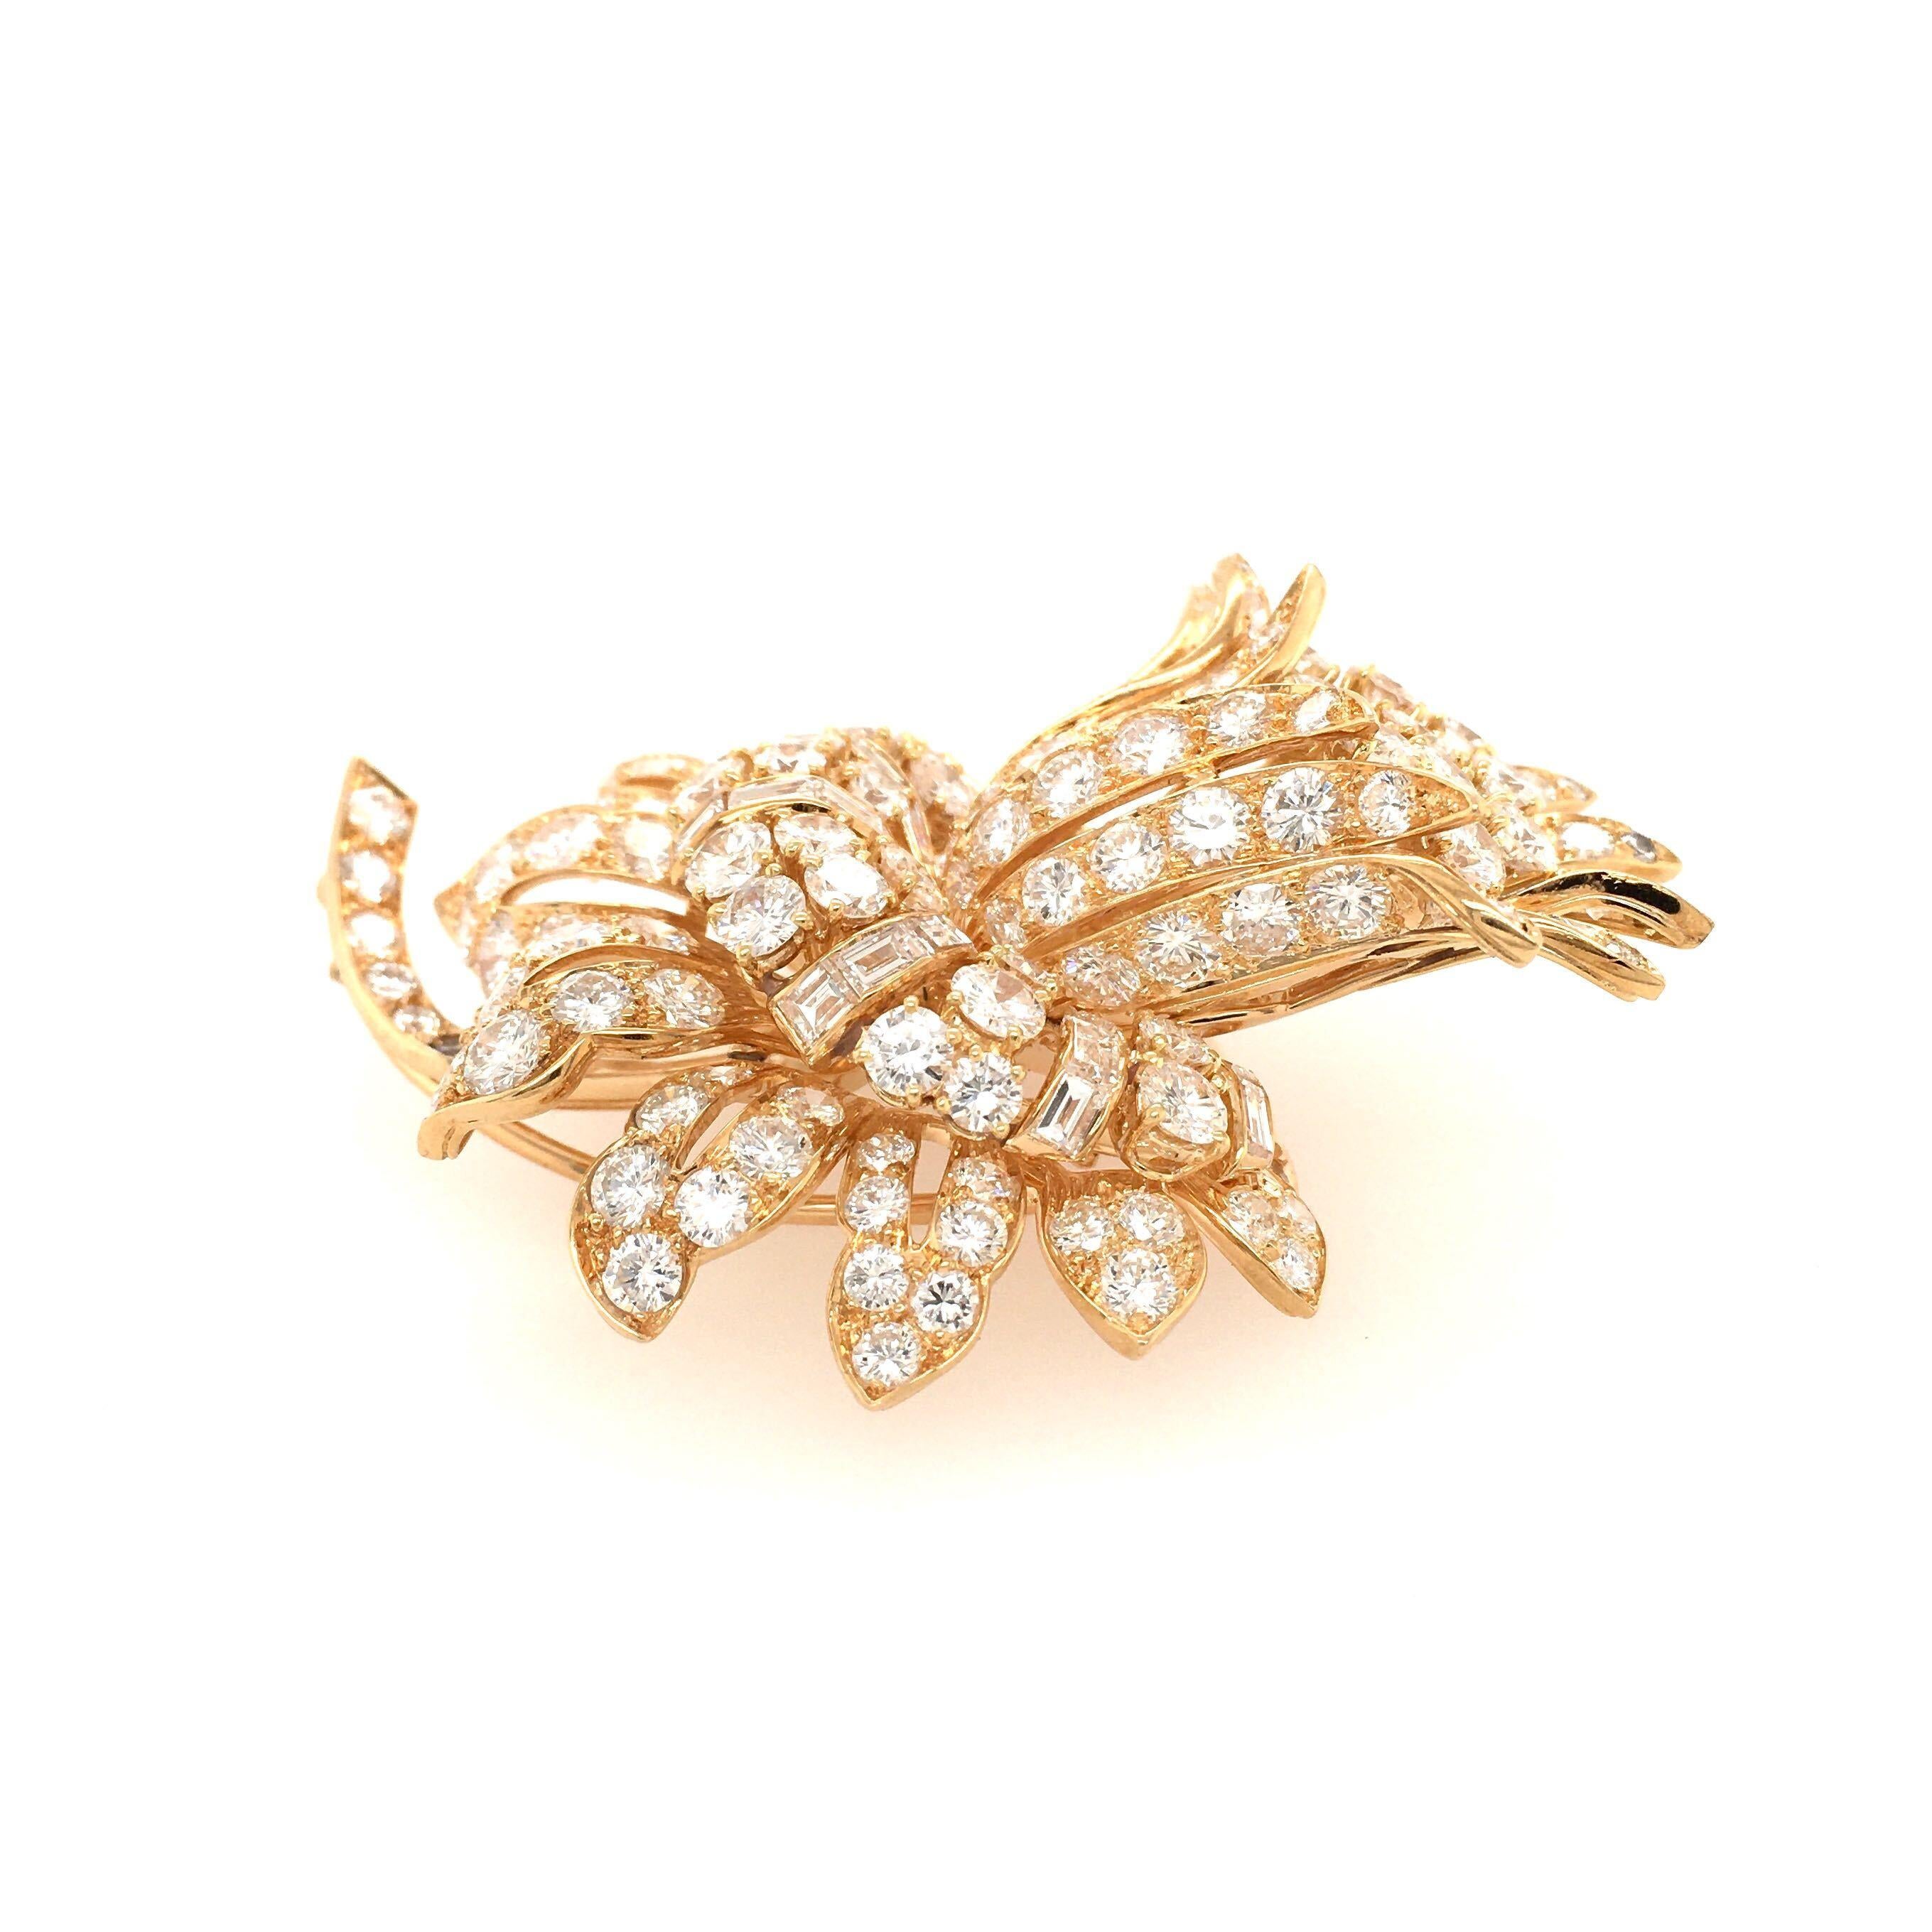 An 18 karat yellow gold and diamond brooch, French, 1960s.  Designed as a flower set with approximately one hundred forty six  brilliant cut diamonds of various sizes and twenty two  baguettes of various sizes.  Total diamond weight approximately